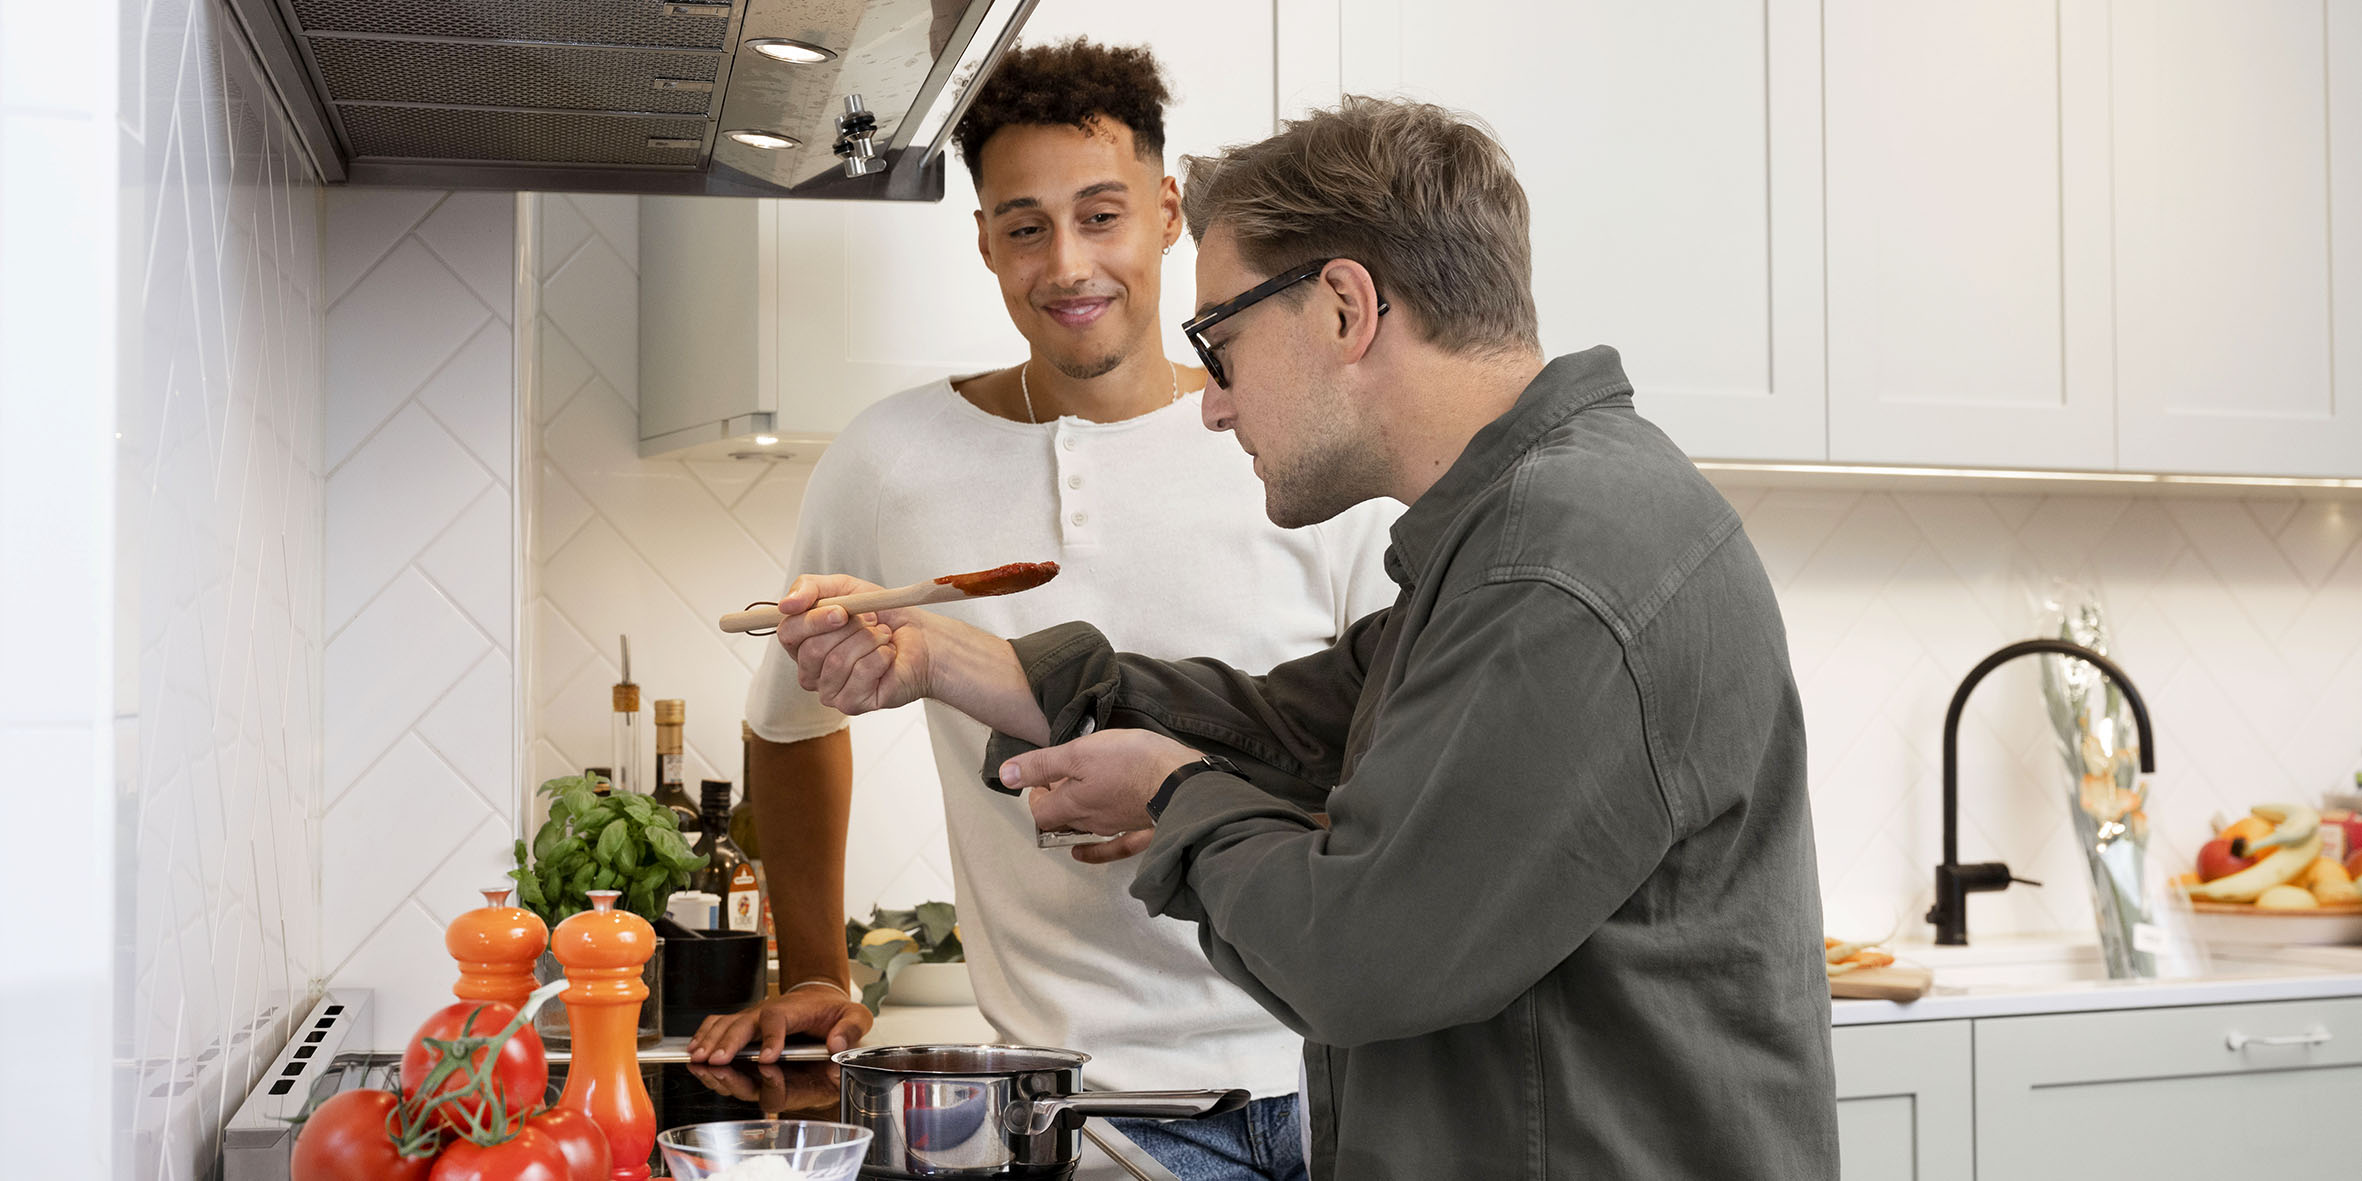 Two men are cooking in a kitchen, standing next to the stove and trying a sauce that is boiling in a pot.